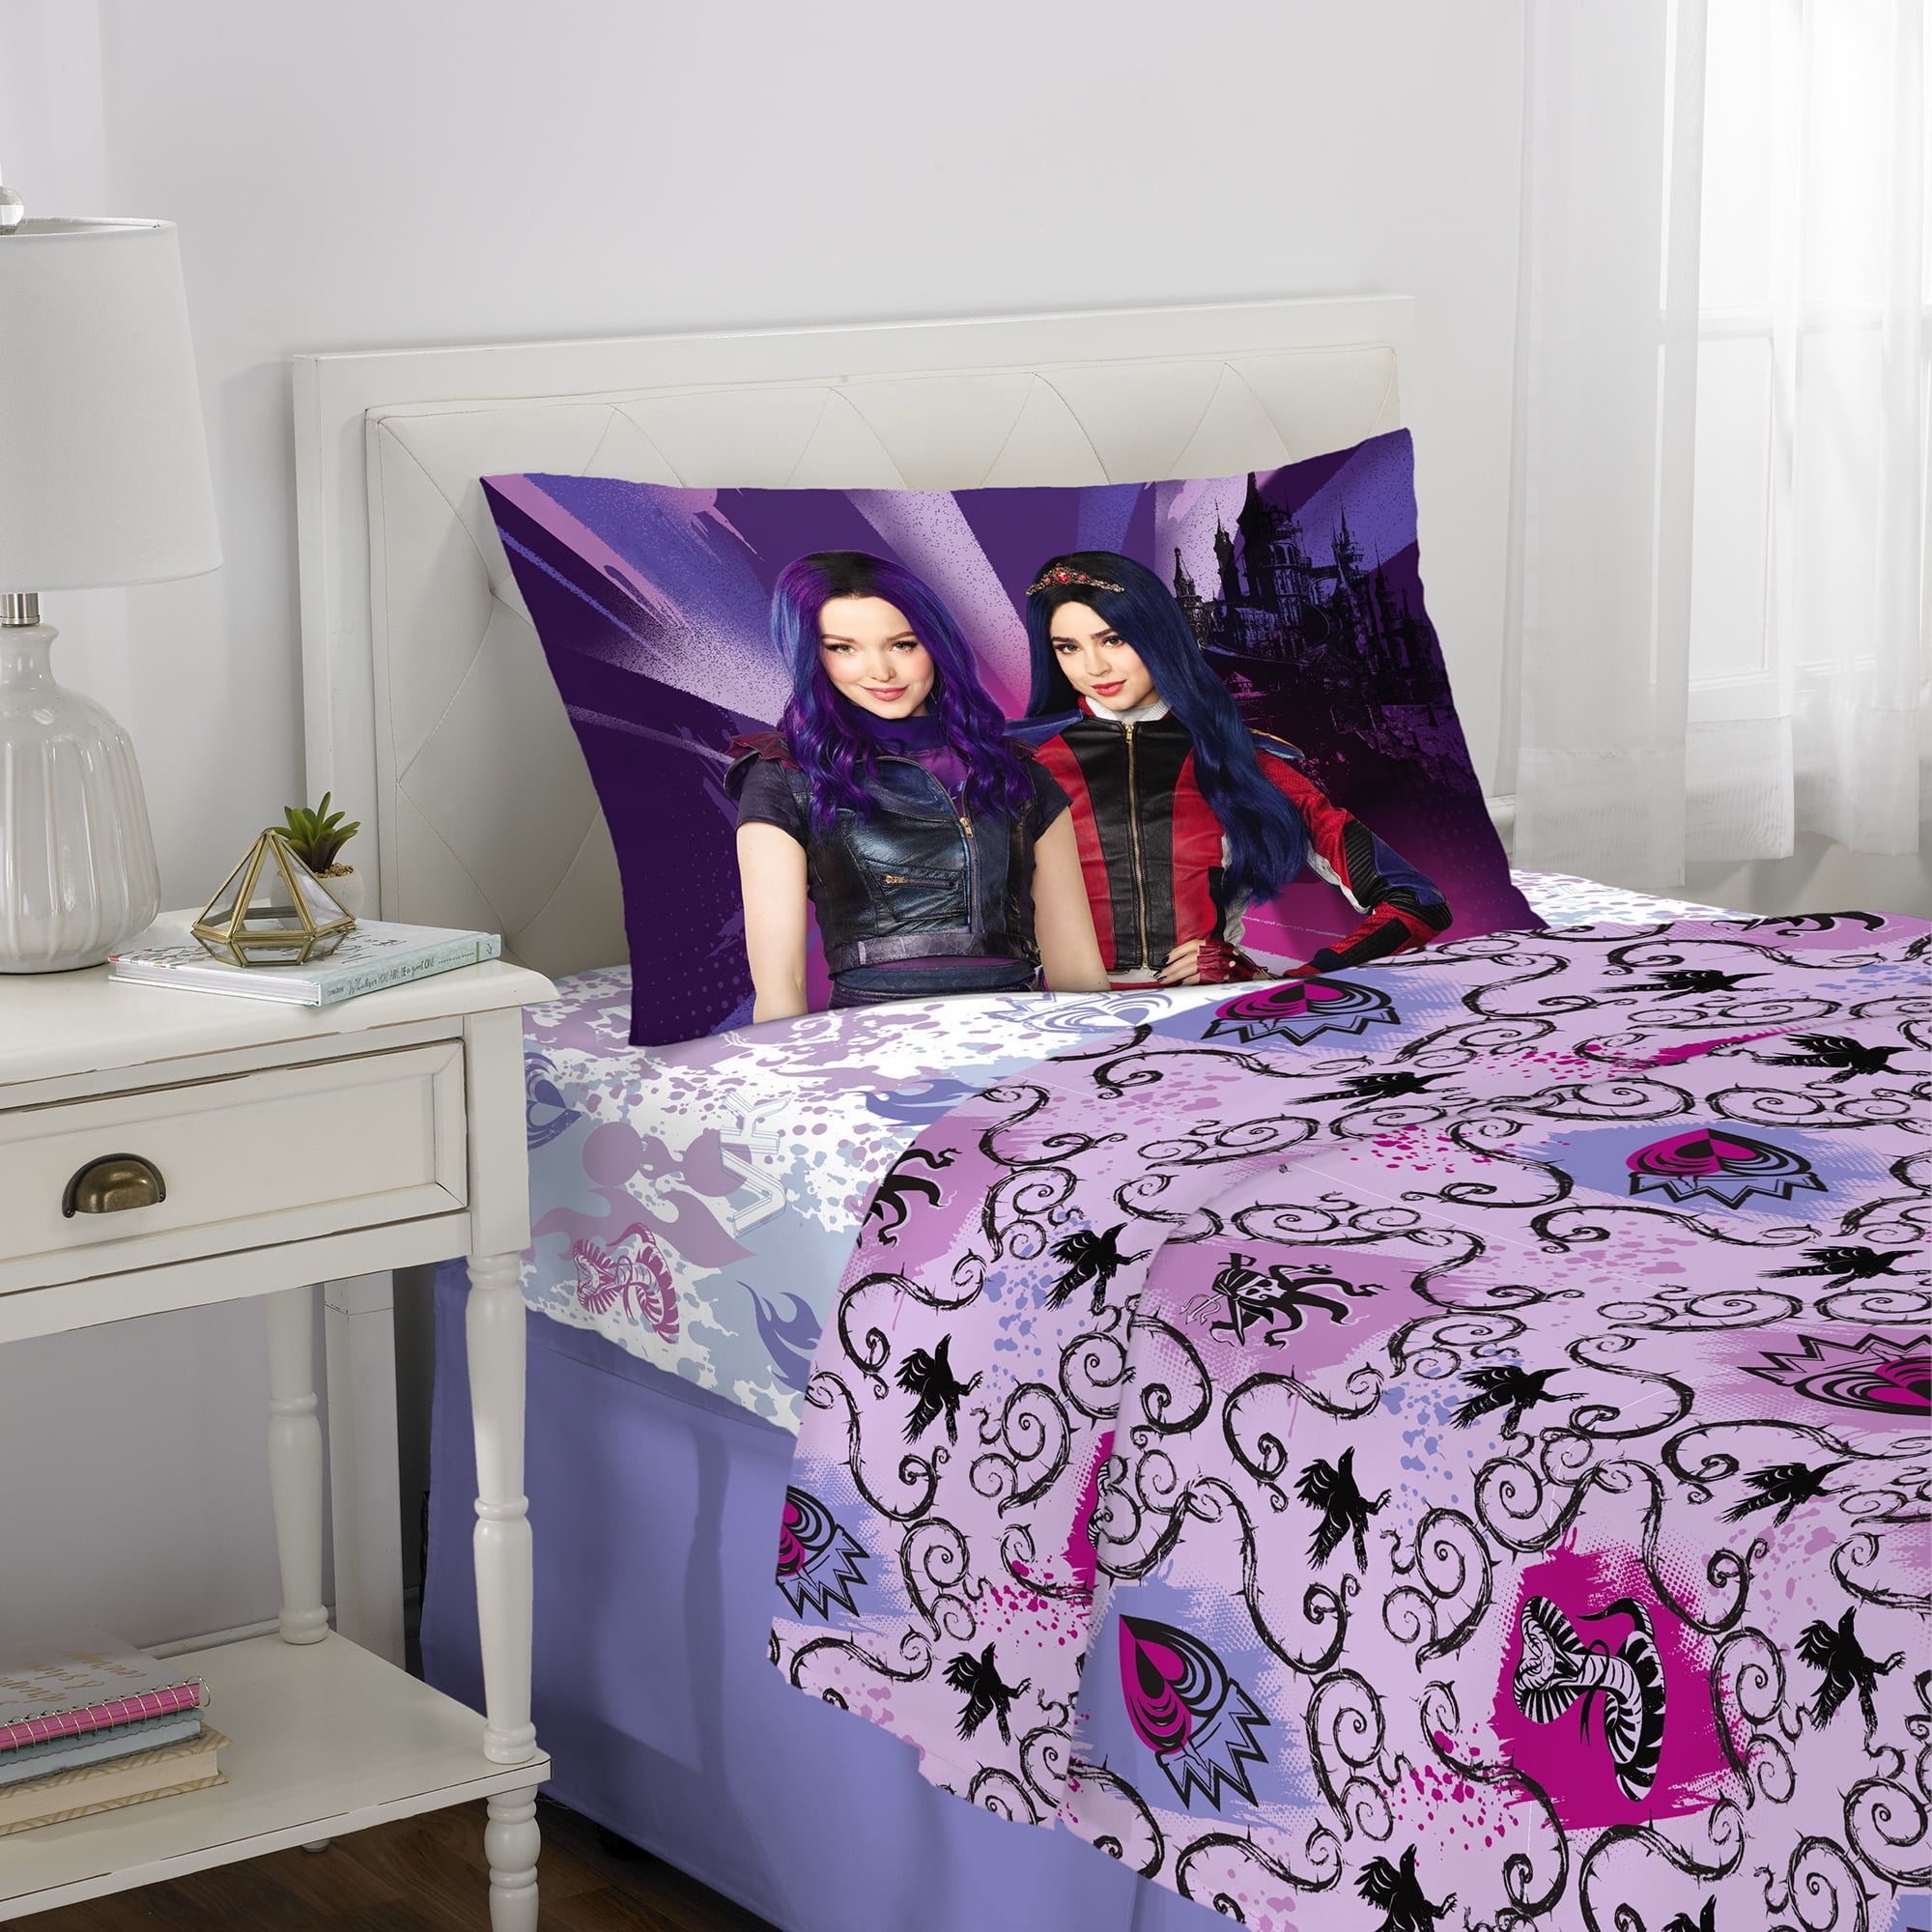 NEW Details about   Descendants 3 Bed in a Bag 5 Piece Reversible Comforter & Sheet Set Twin 